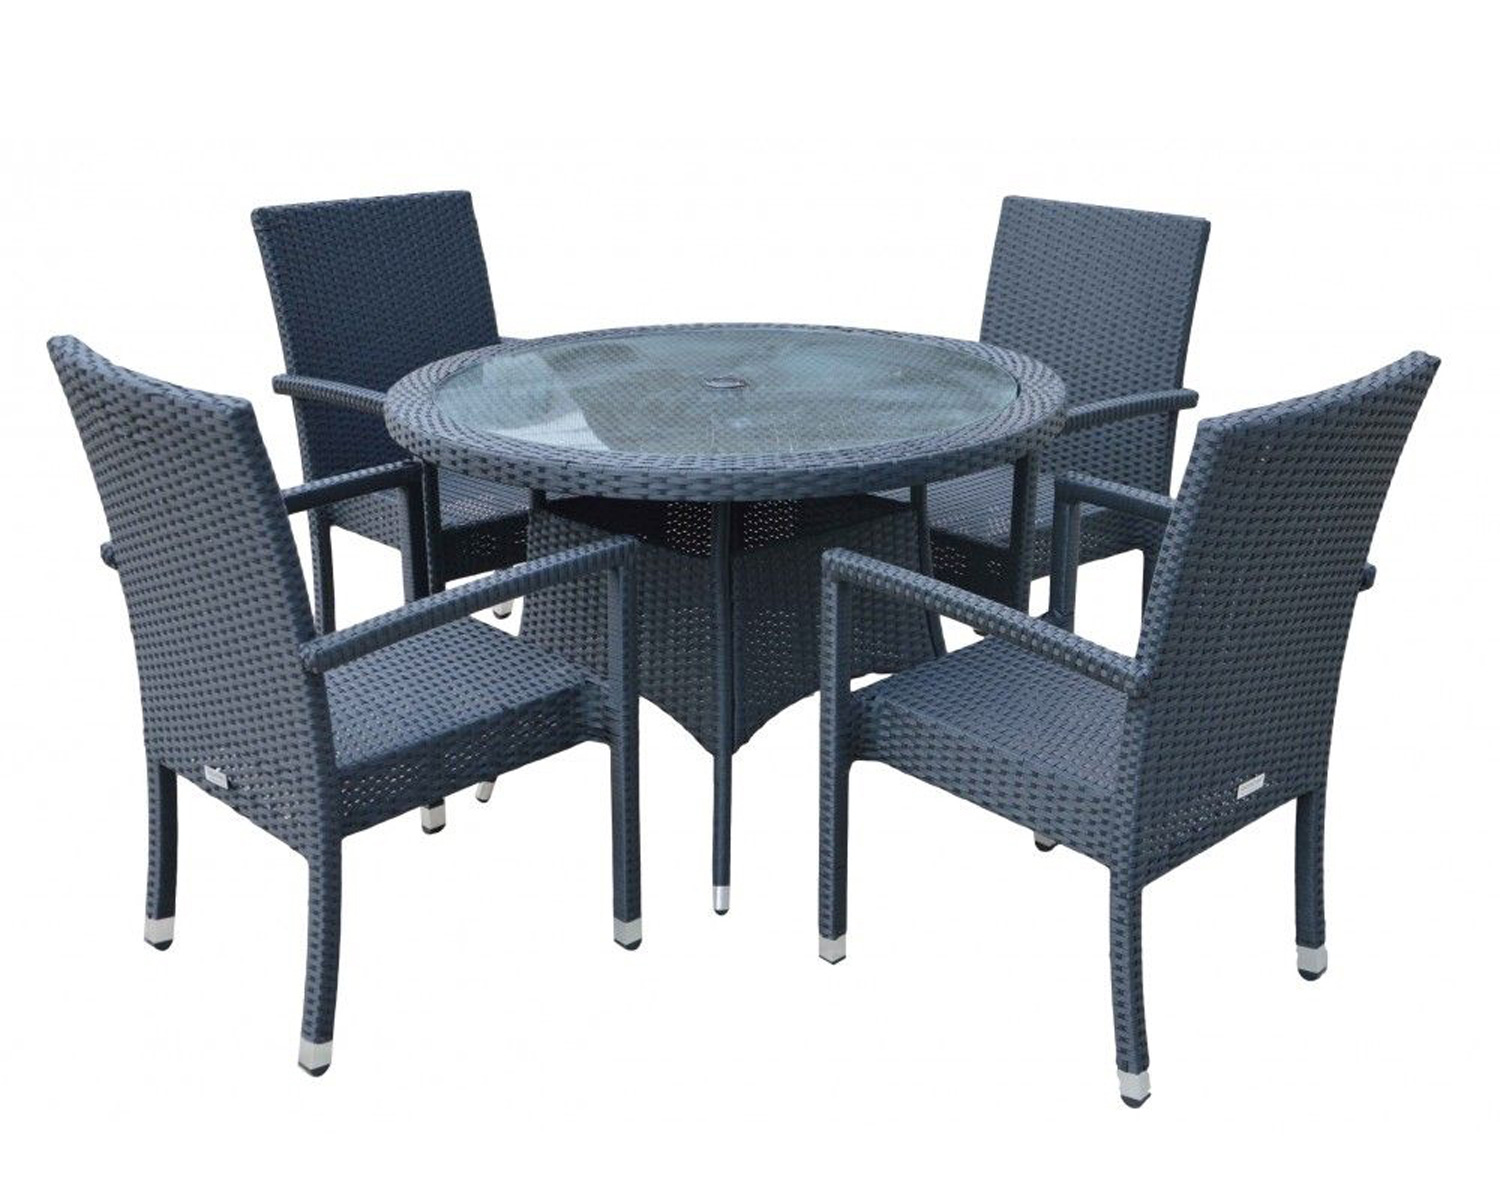 4 Seat Rattan Garden Dining Set With Small Round Dining Table In Black Rio Rattan Direct